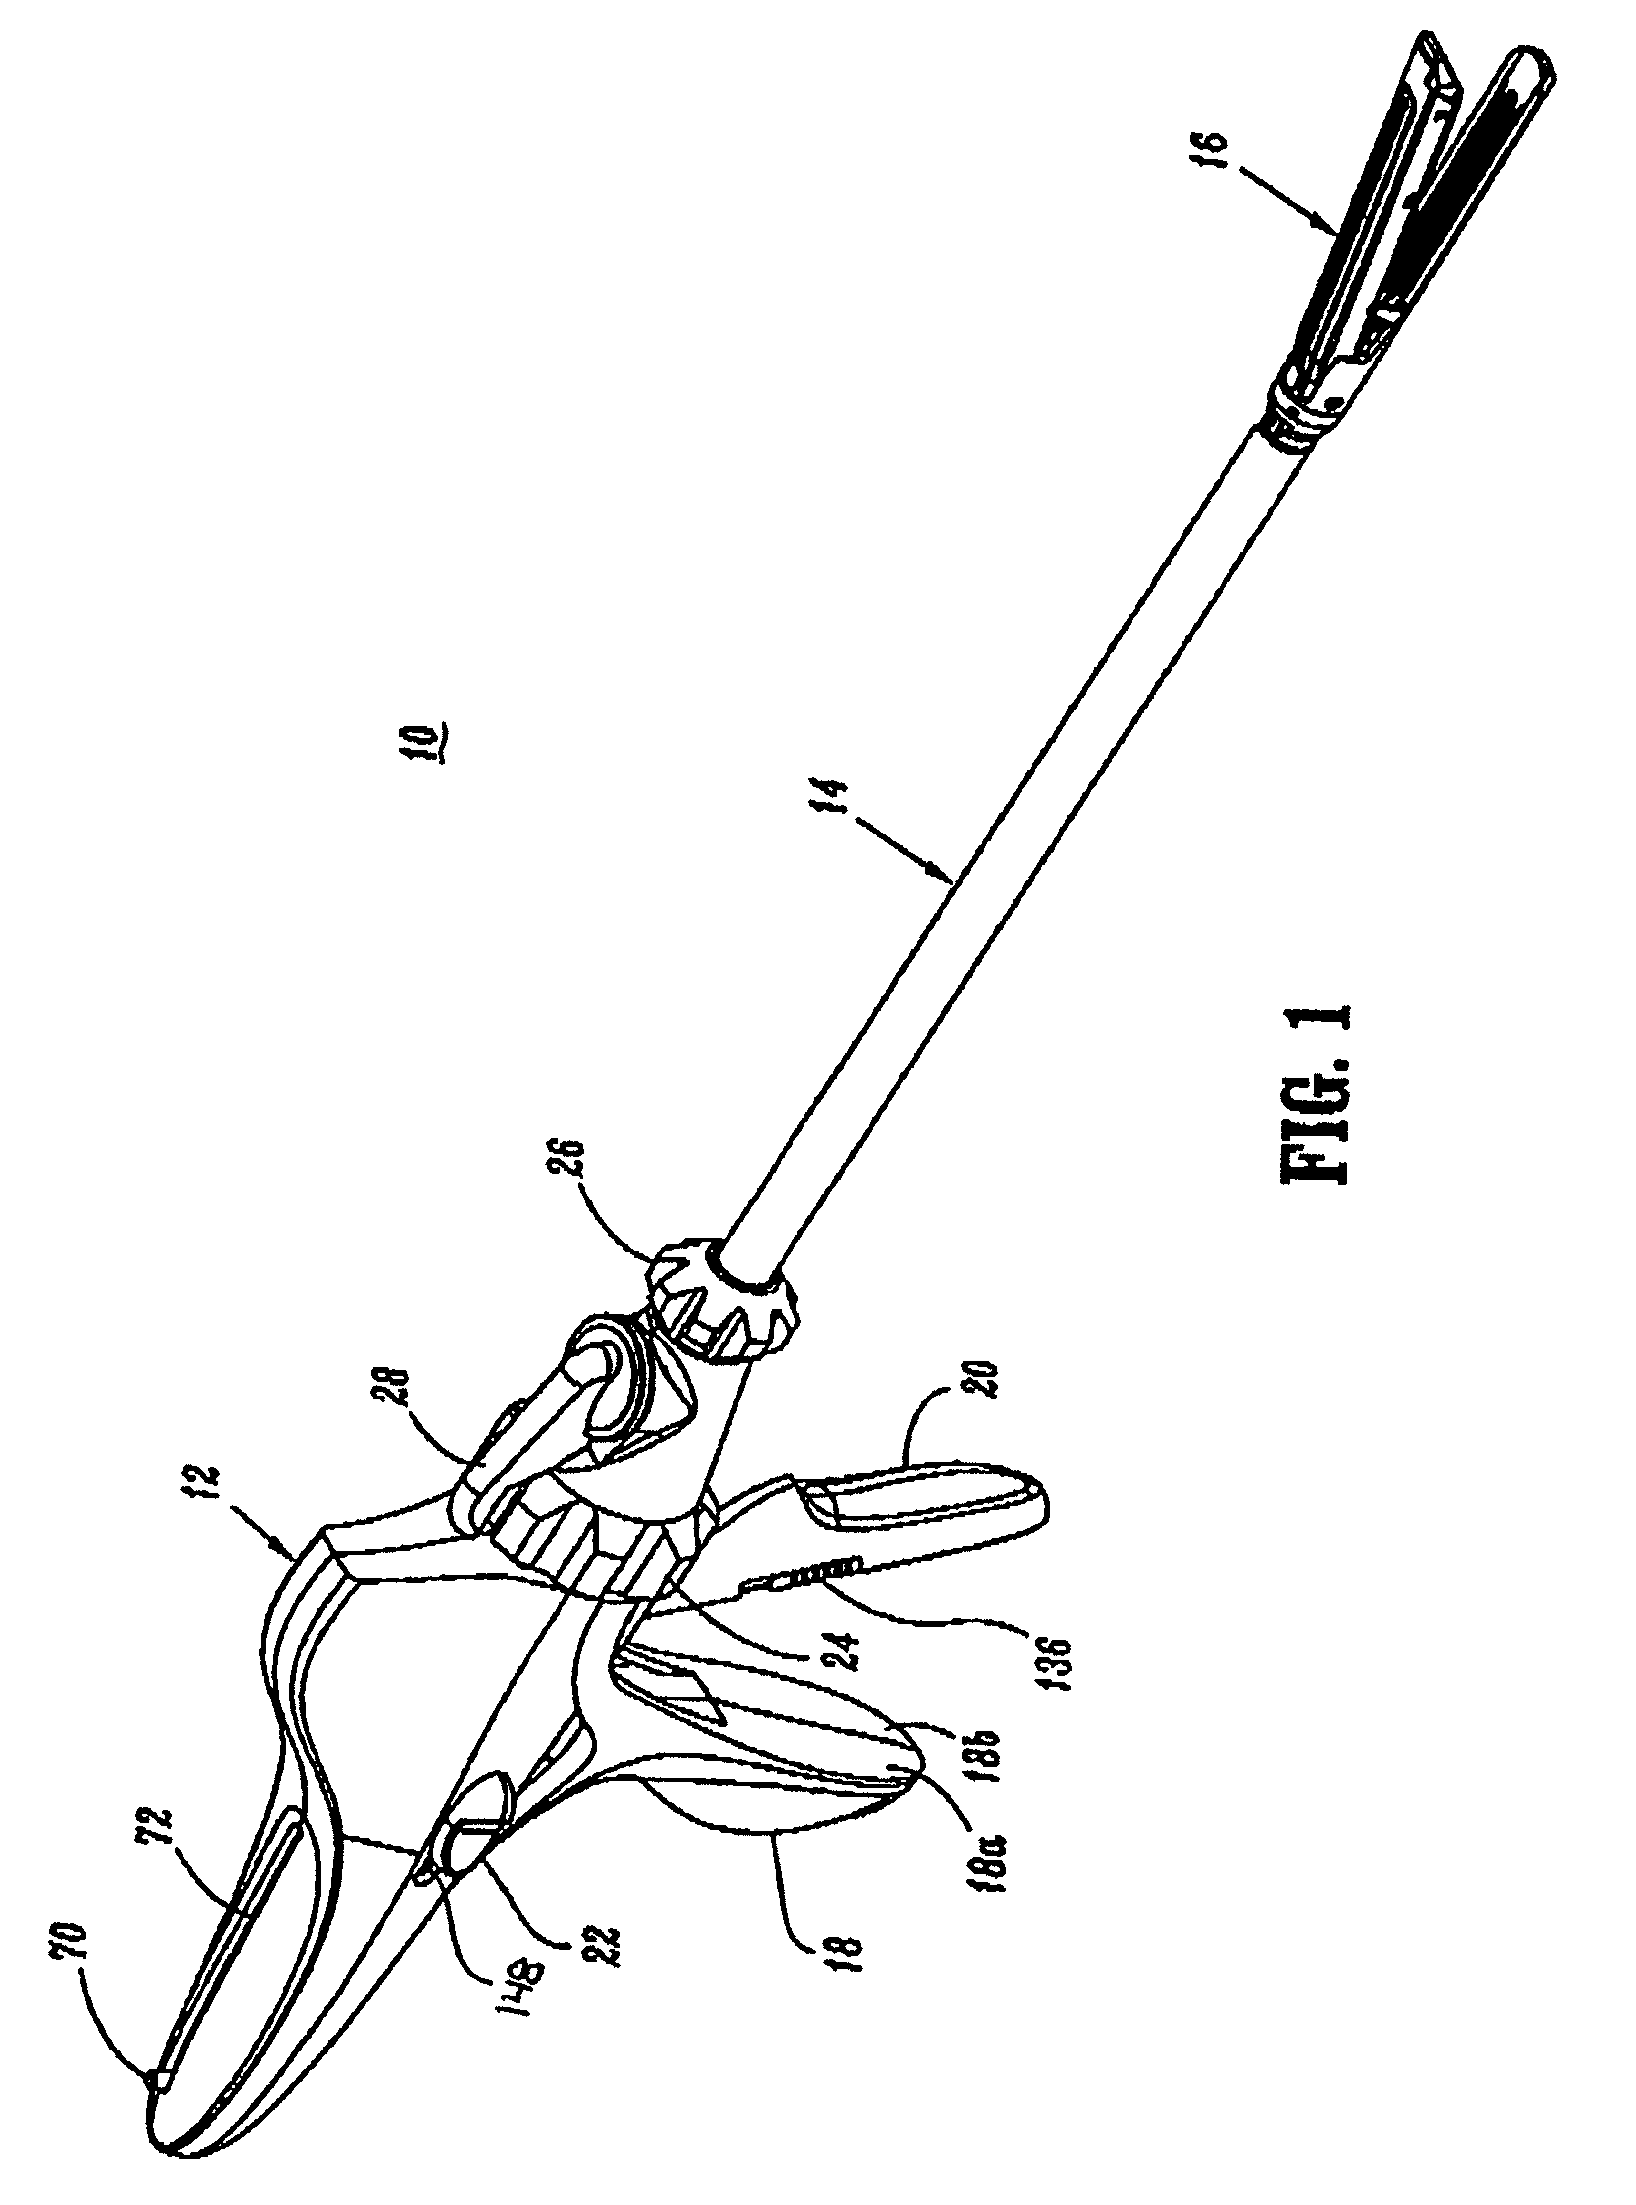 Surgical stapling device with independent tip rotation